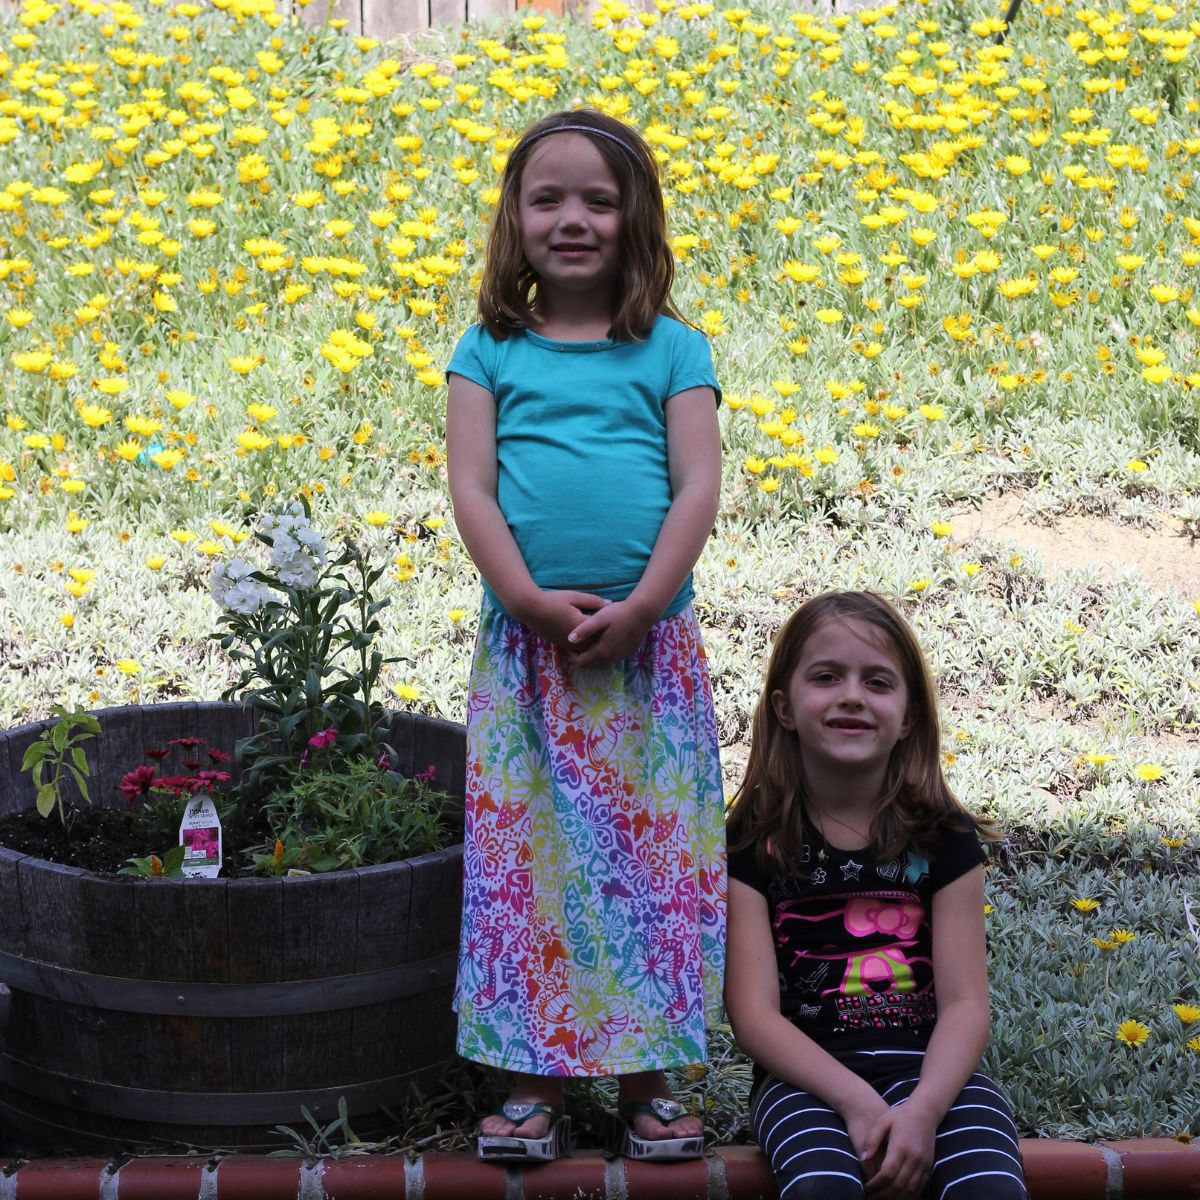 girls near a flower planter with newly planted flowers with tags.